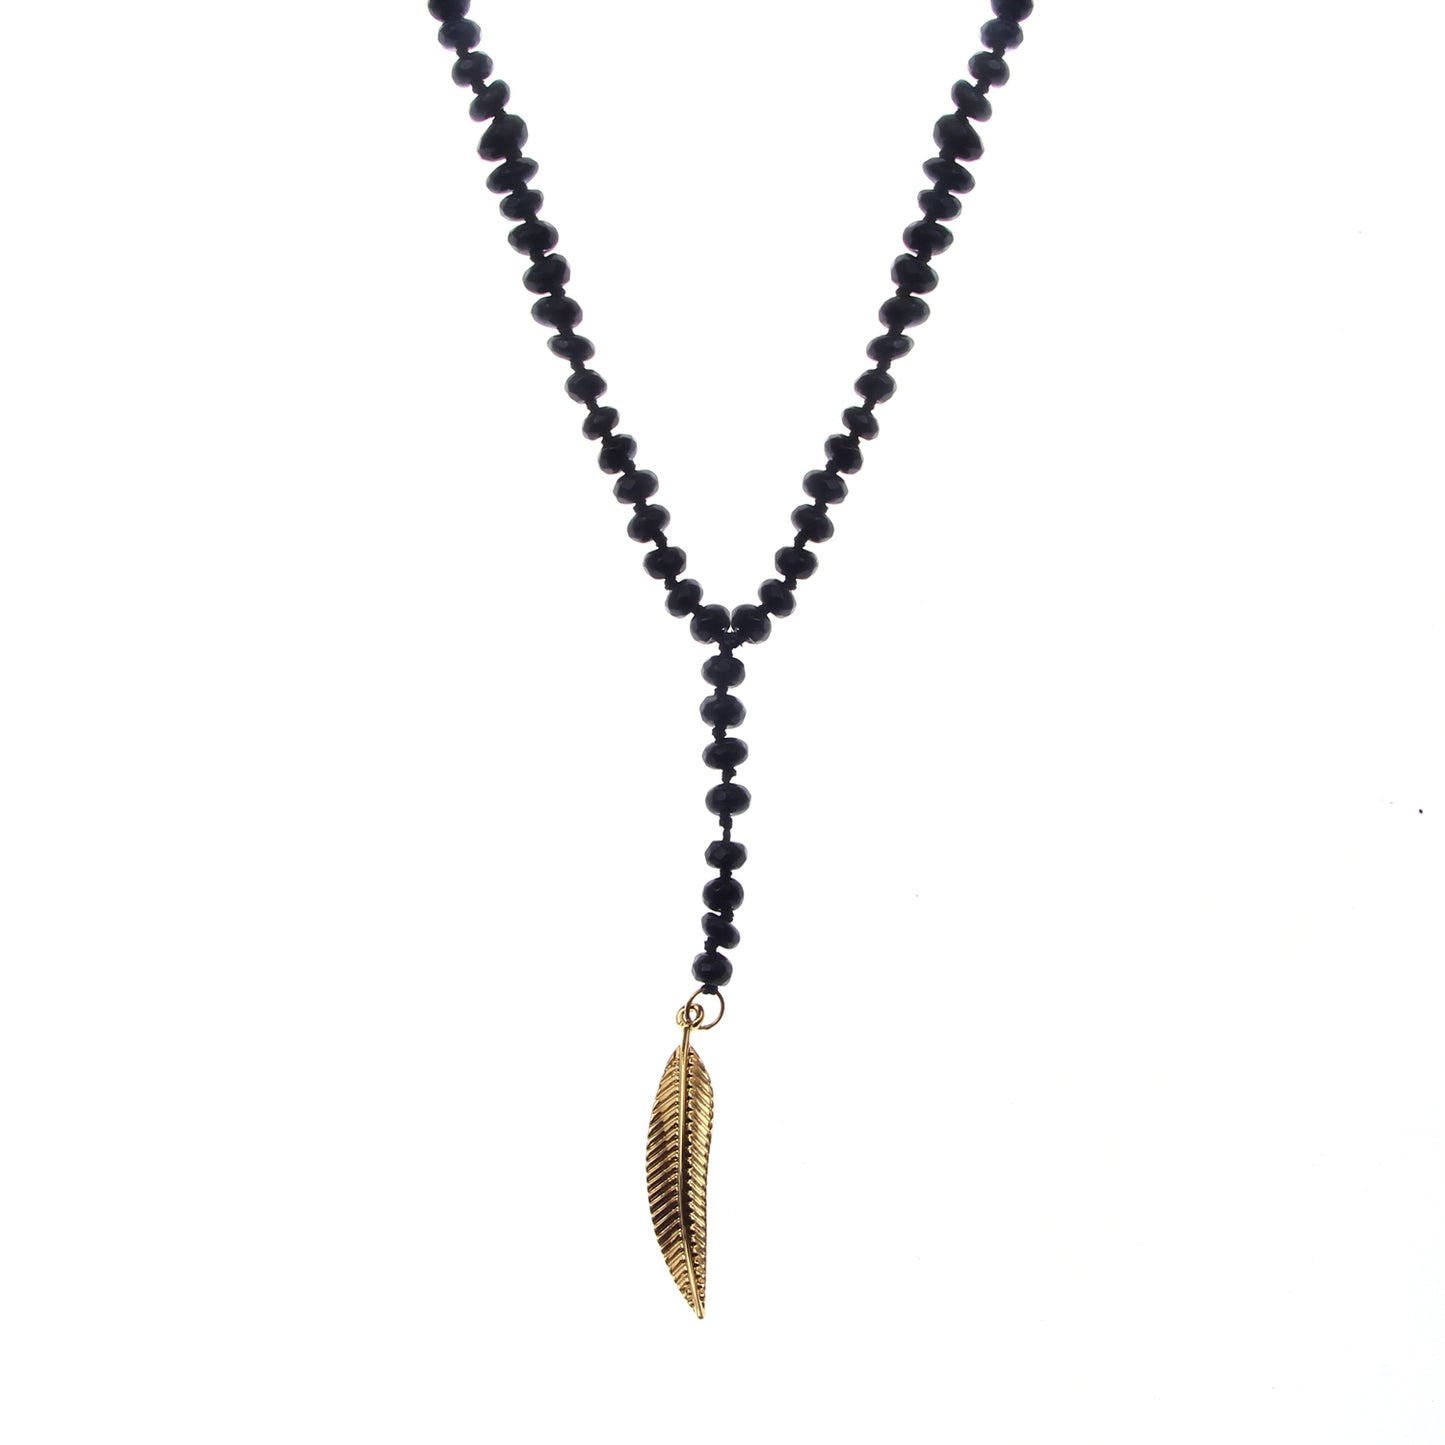 MeMe London Angels Feather Necklace - Black with gold